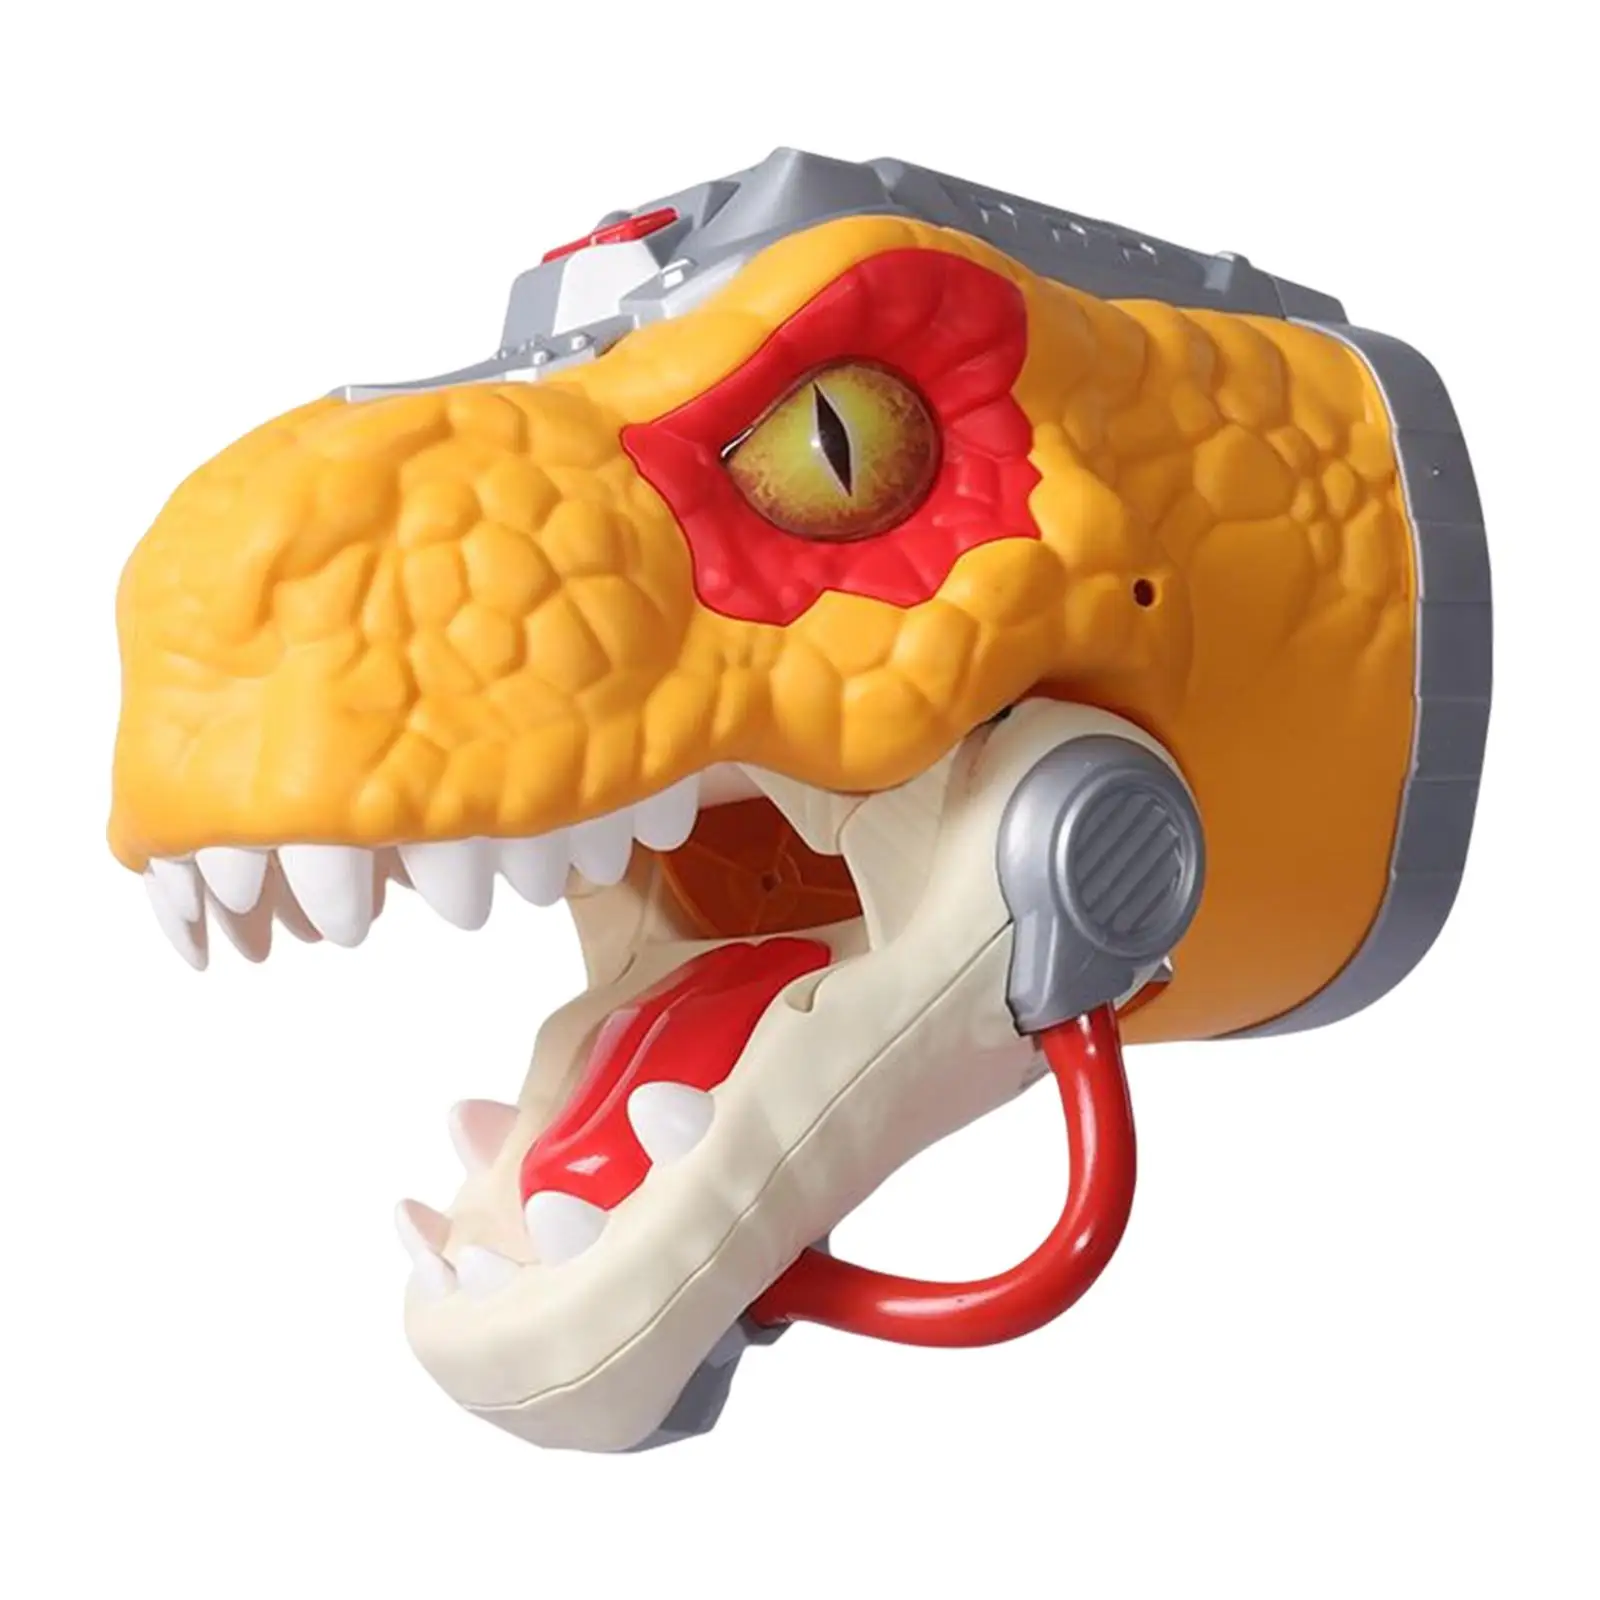 Dinosaur Hand Puppet Toy with Sound and Light Dino Toy for Girls Kids Boys